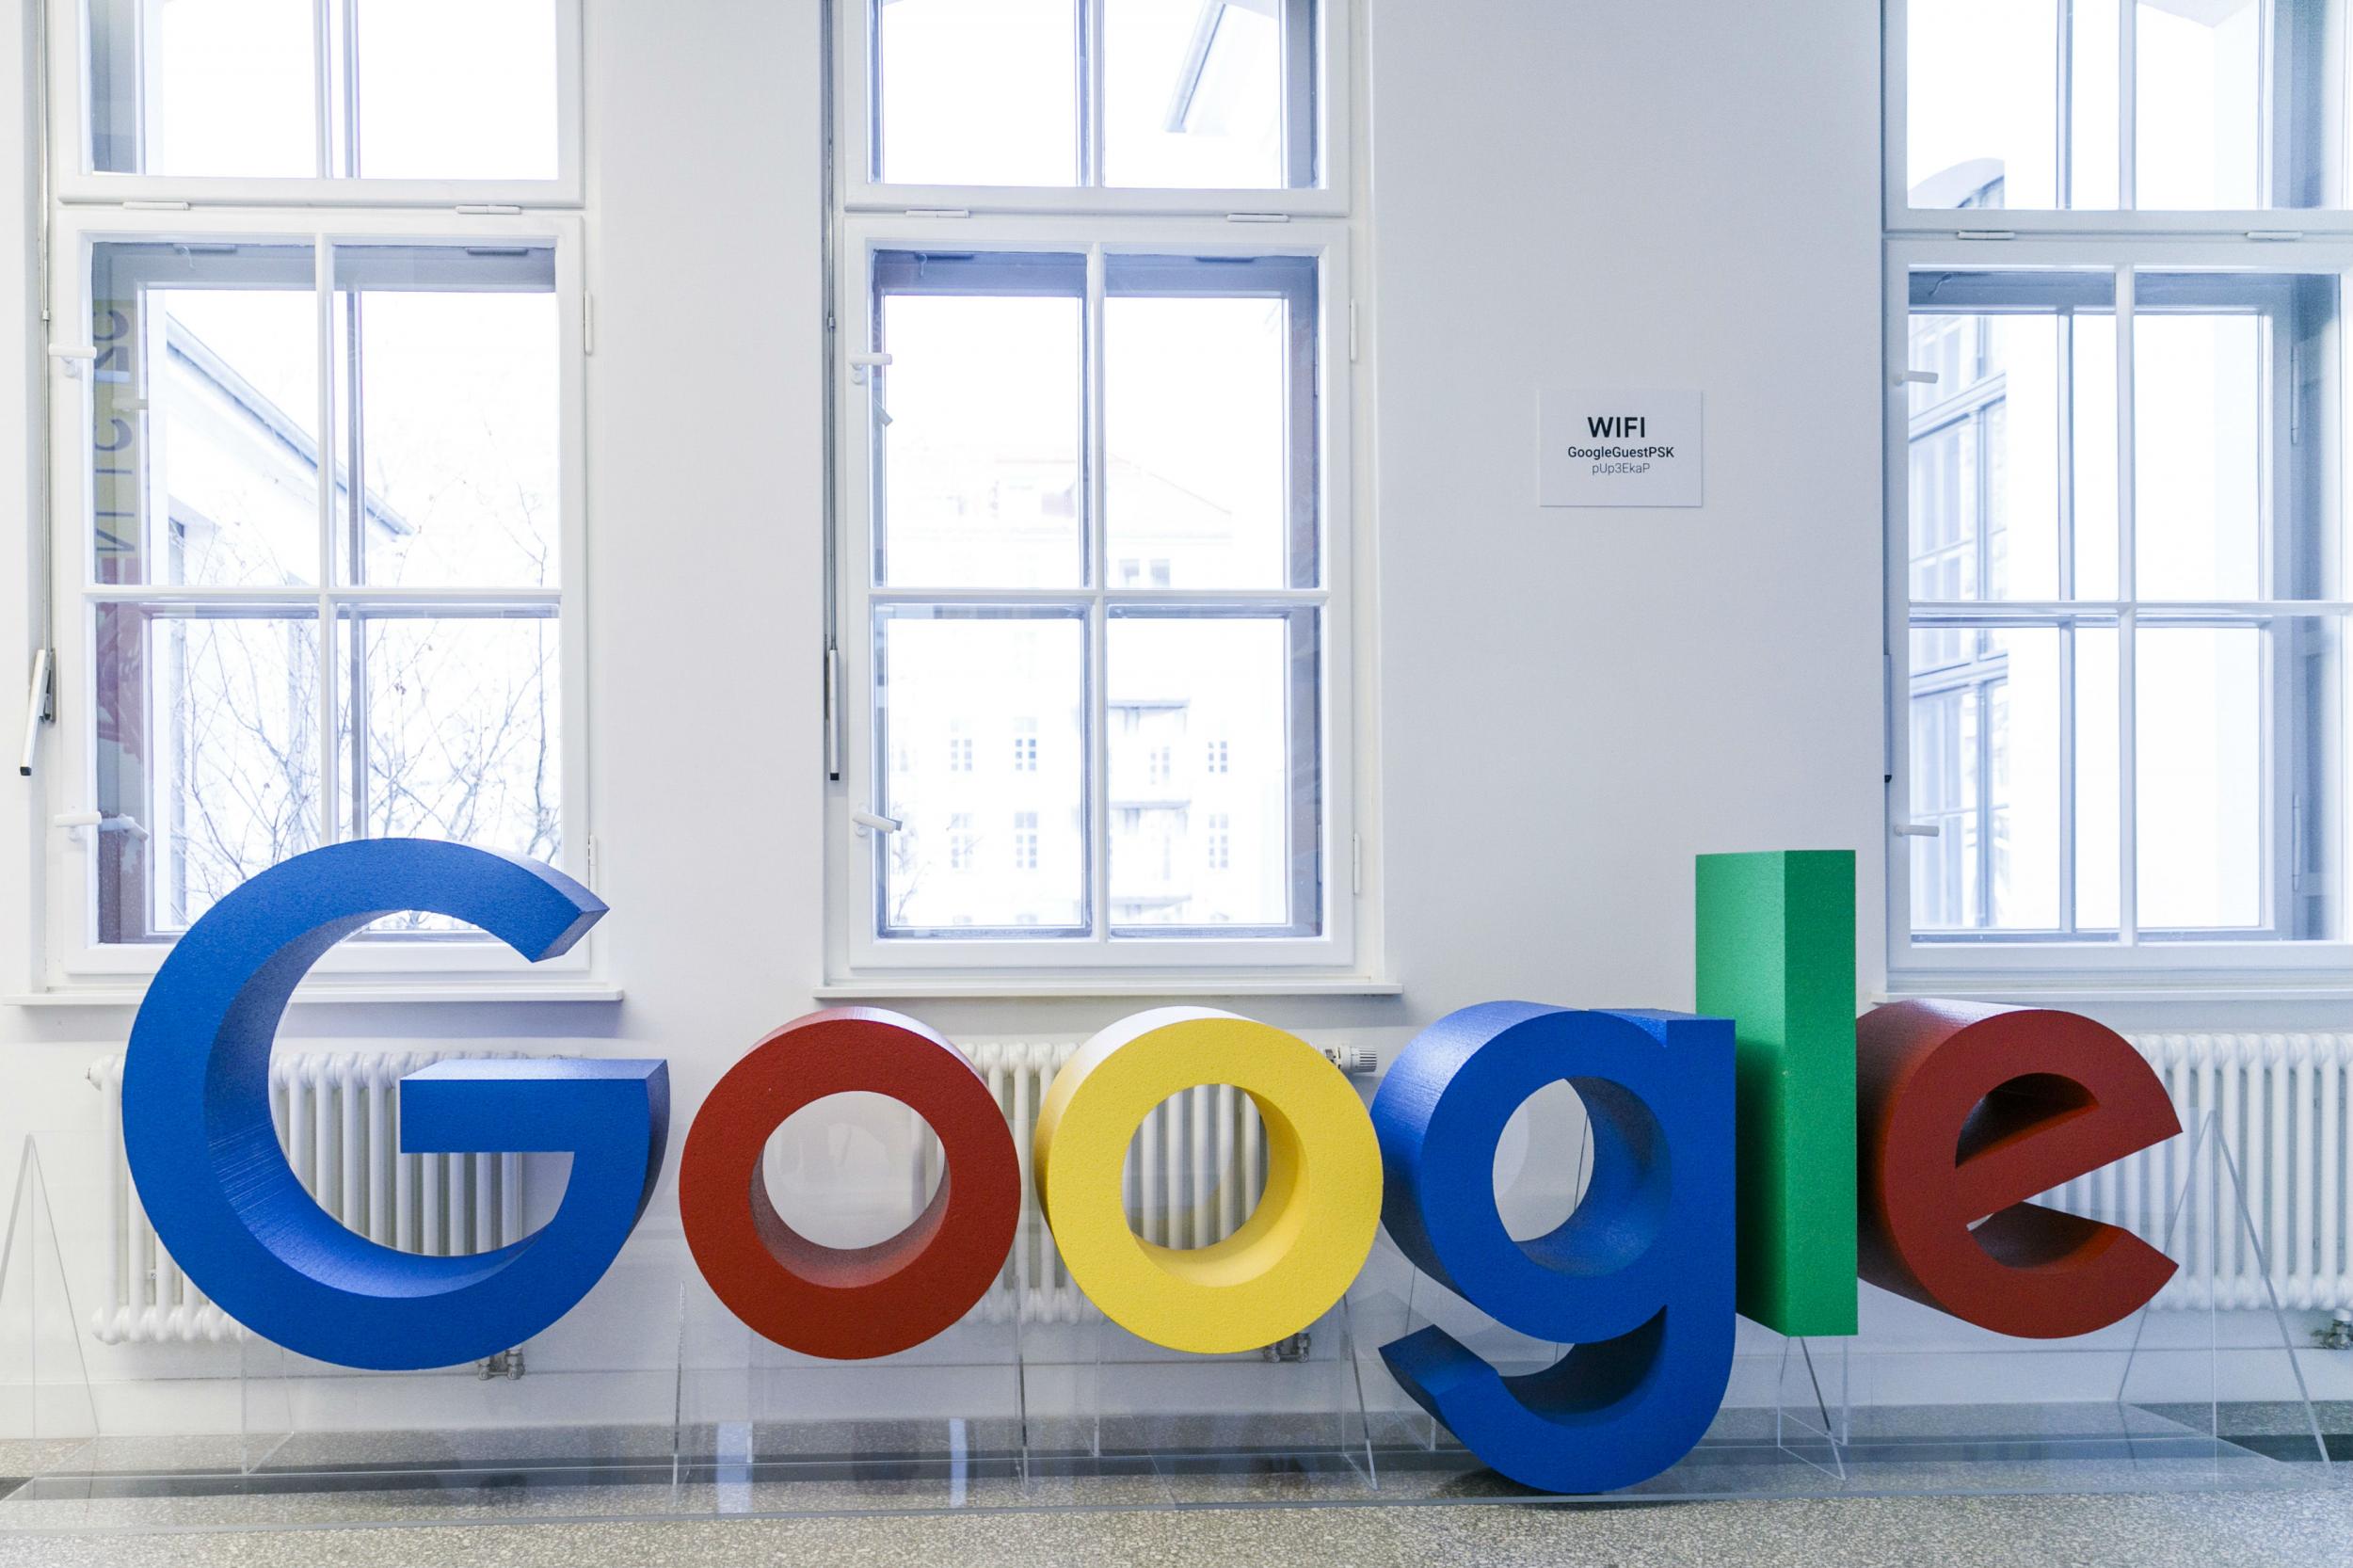 Google's parent company Alphabet is being punished over anticompetitive advertising restrictions it featured on search widgets